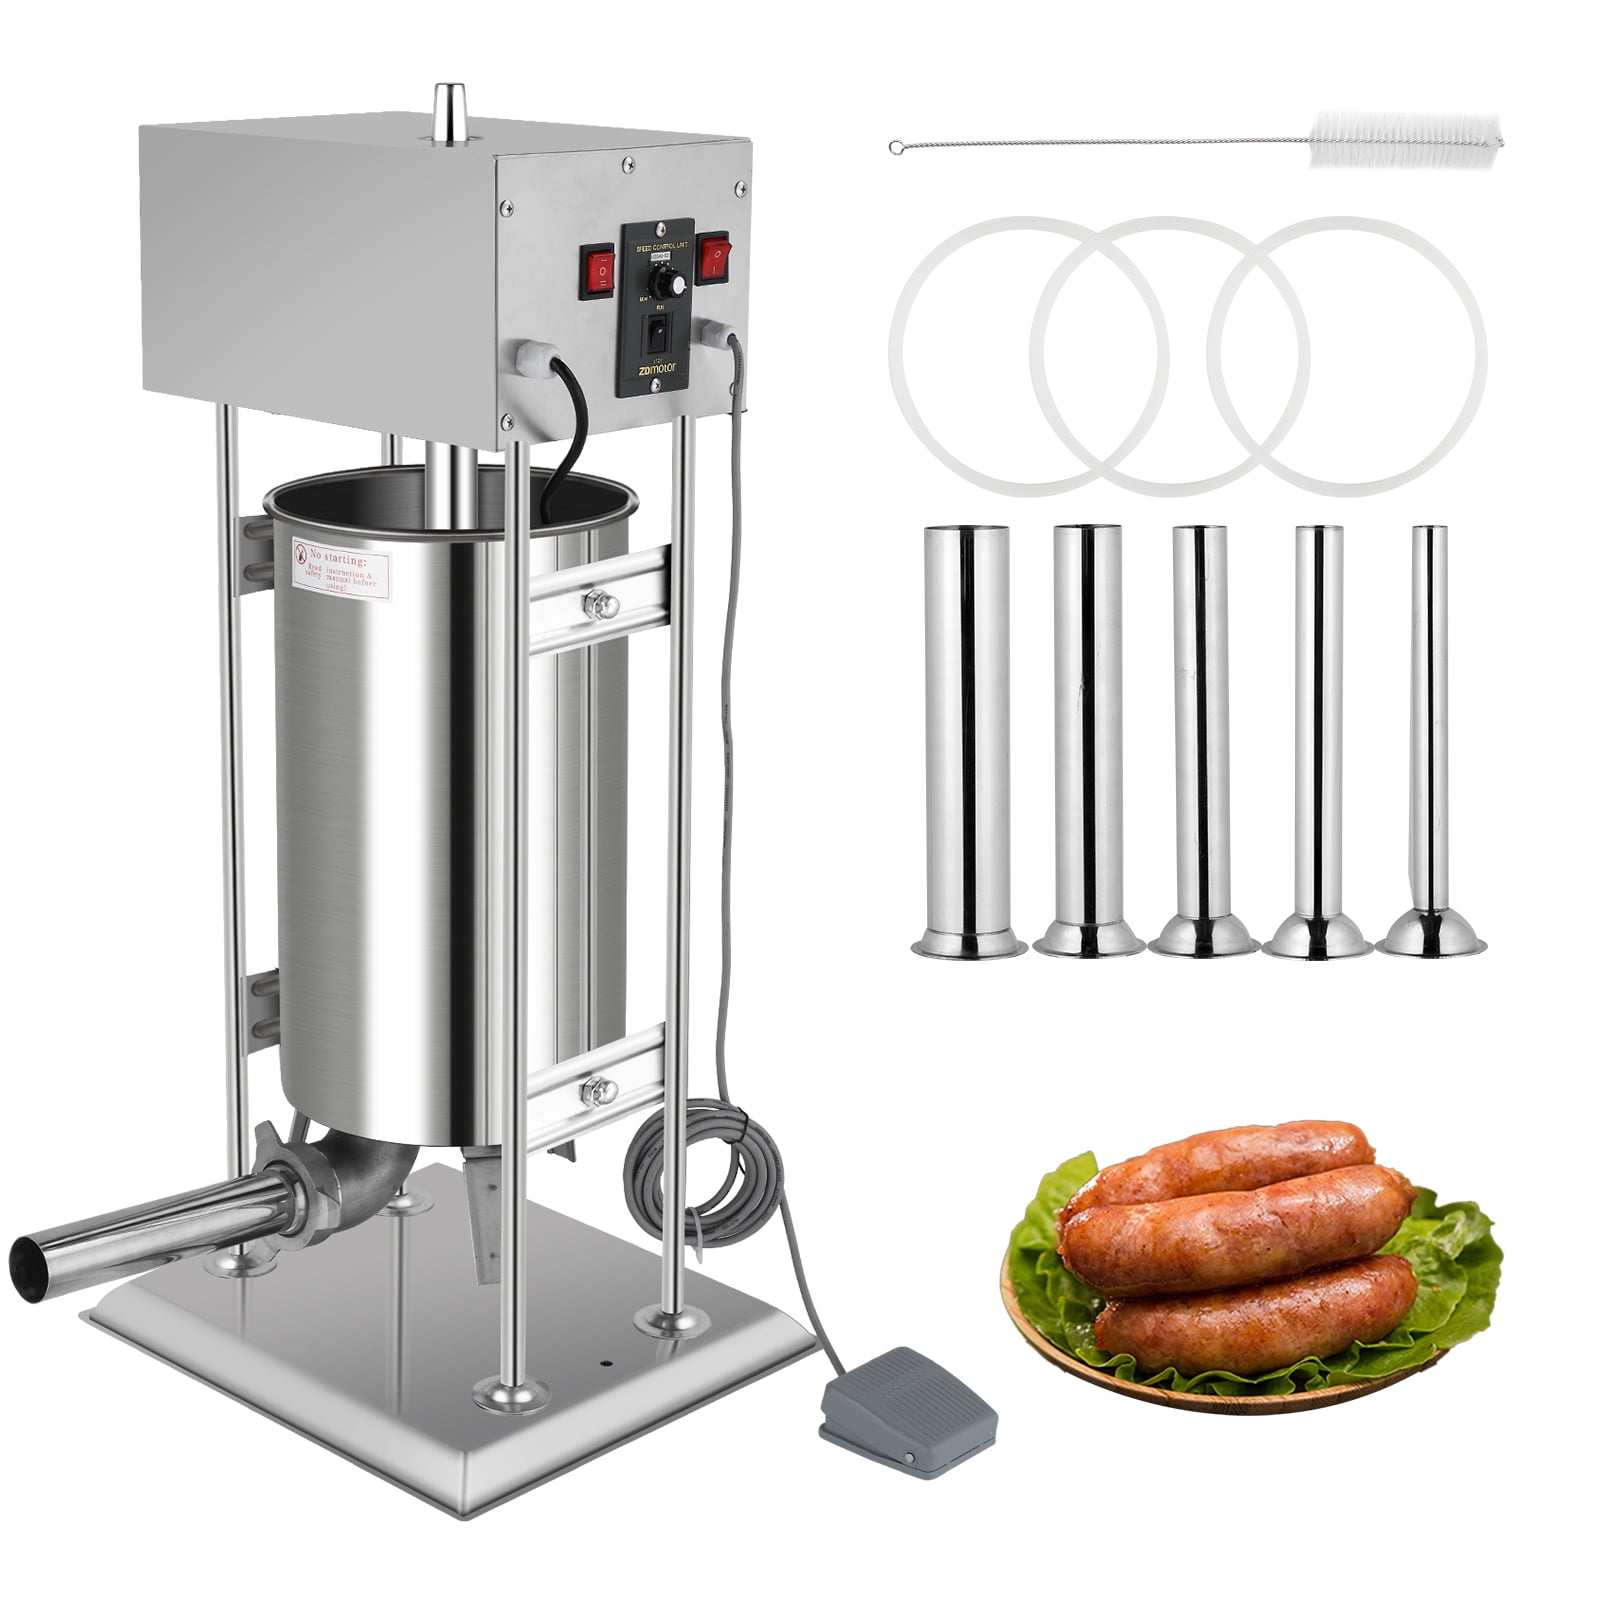 Meat Gear - Premium Electric Sausage Stuffer - 10 or 15 Liters Capacit –  Butcher Better